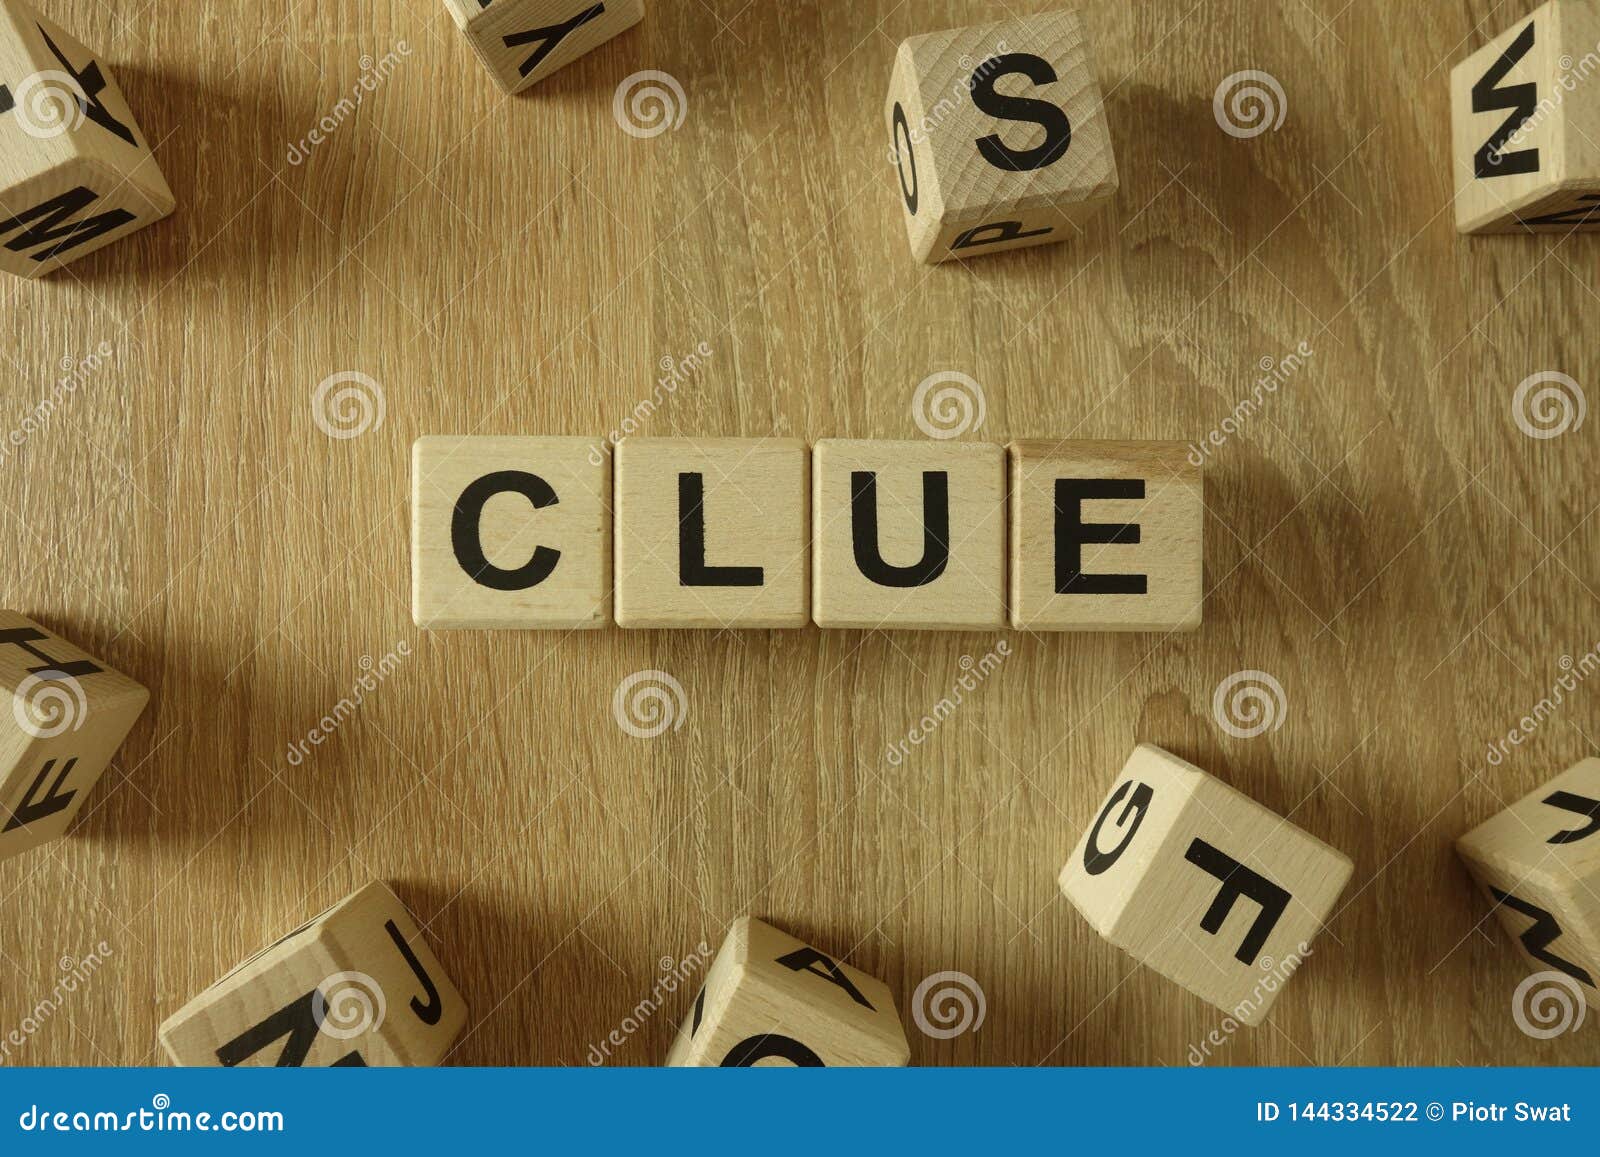 Clue Word from Wooden Blocks Stock Photo Image of education, guide